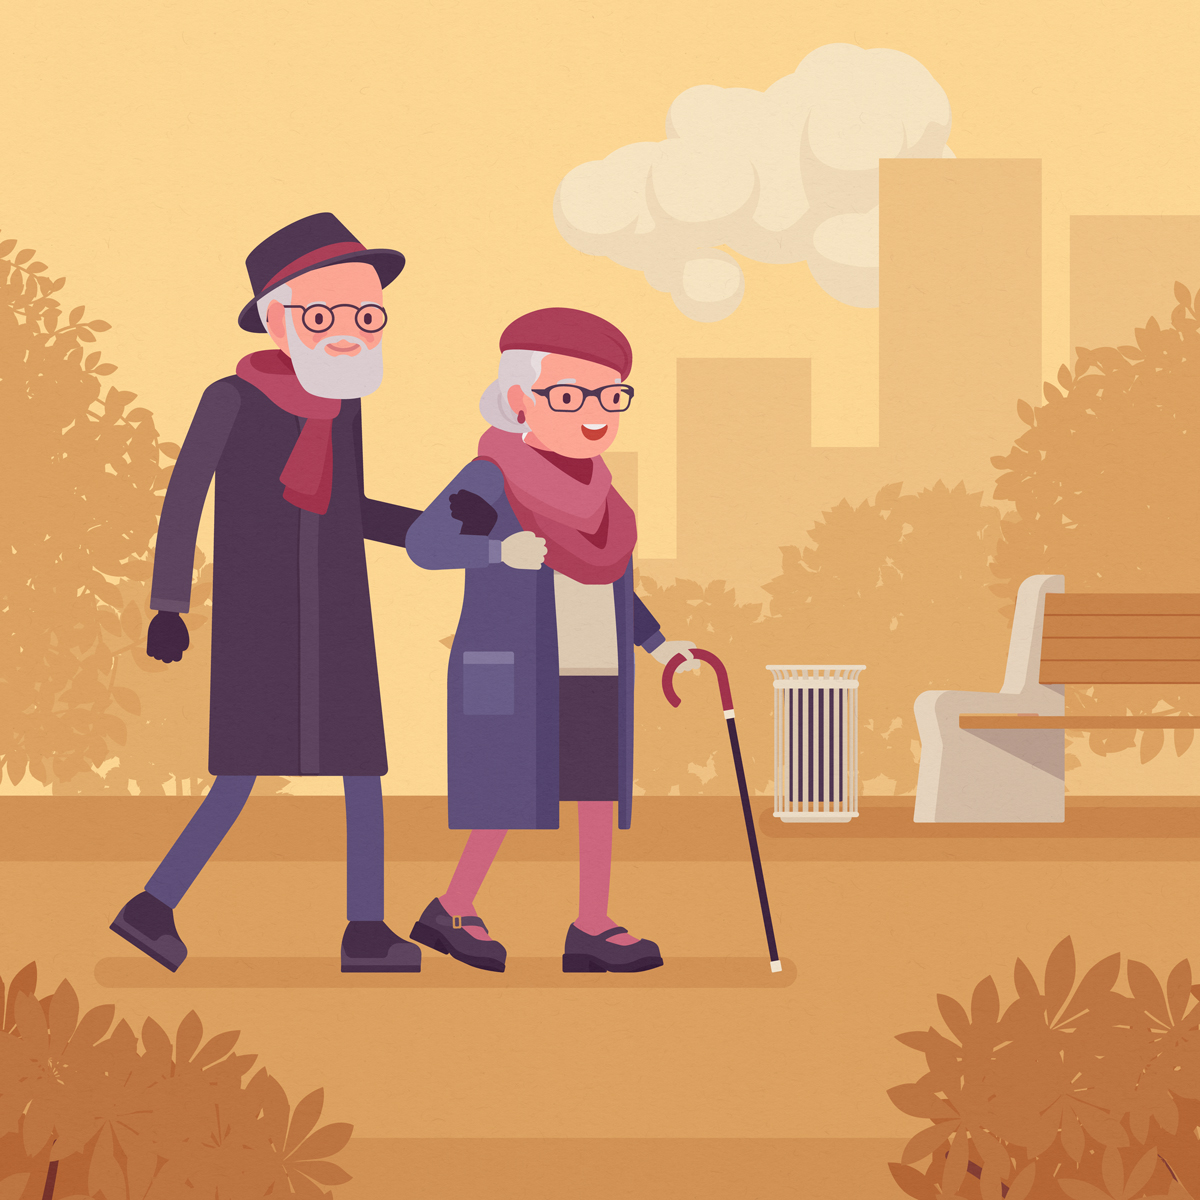 age-friendly cities